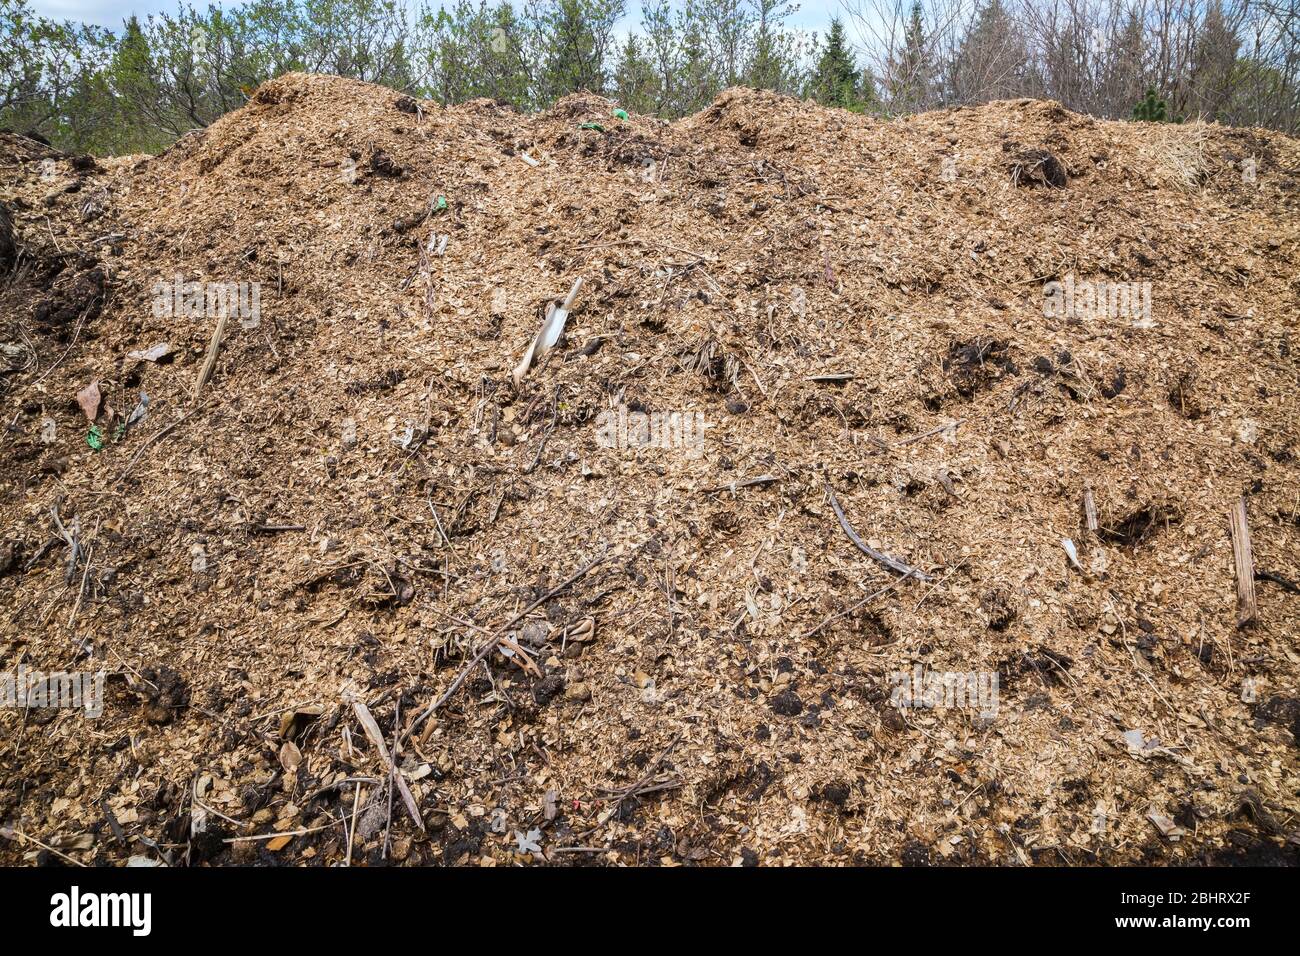 Pile of twigs, branches, leaves and woodchips composting Stock Photo